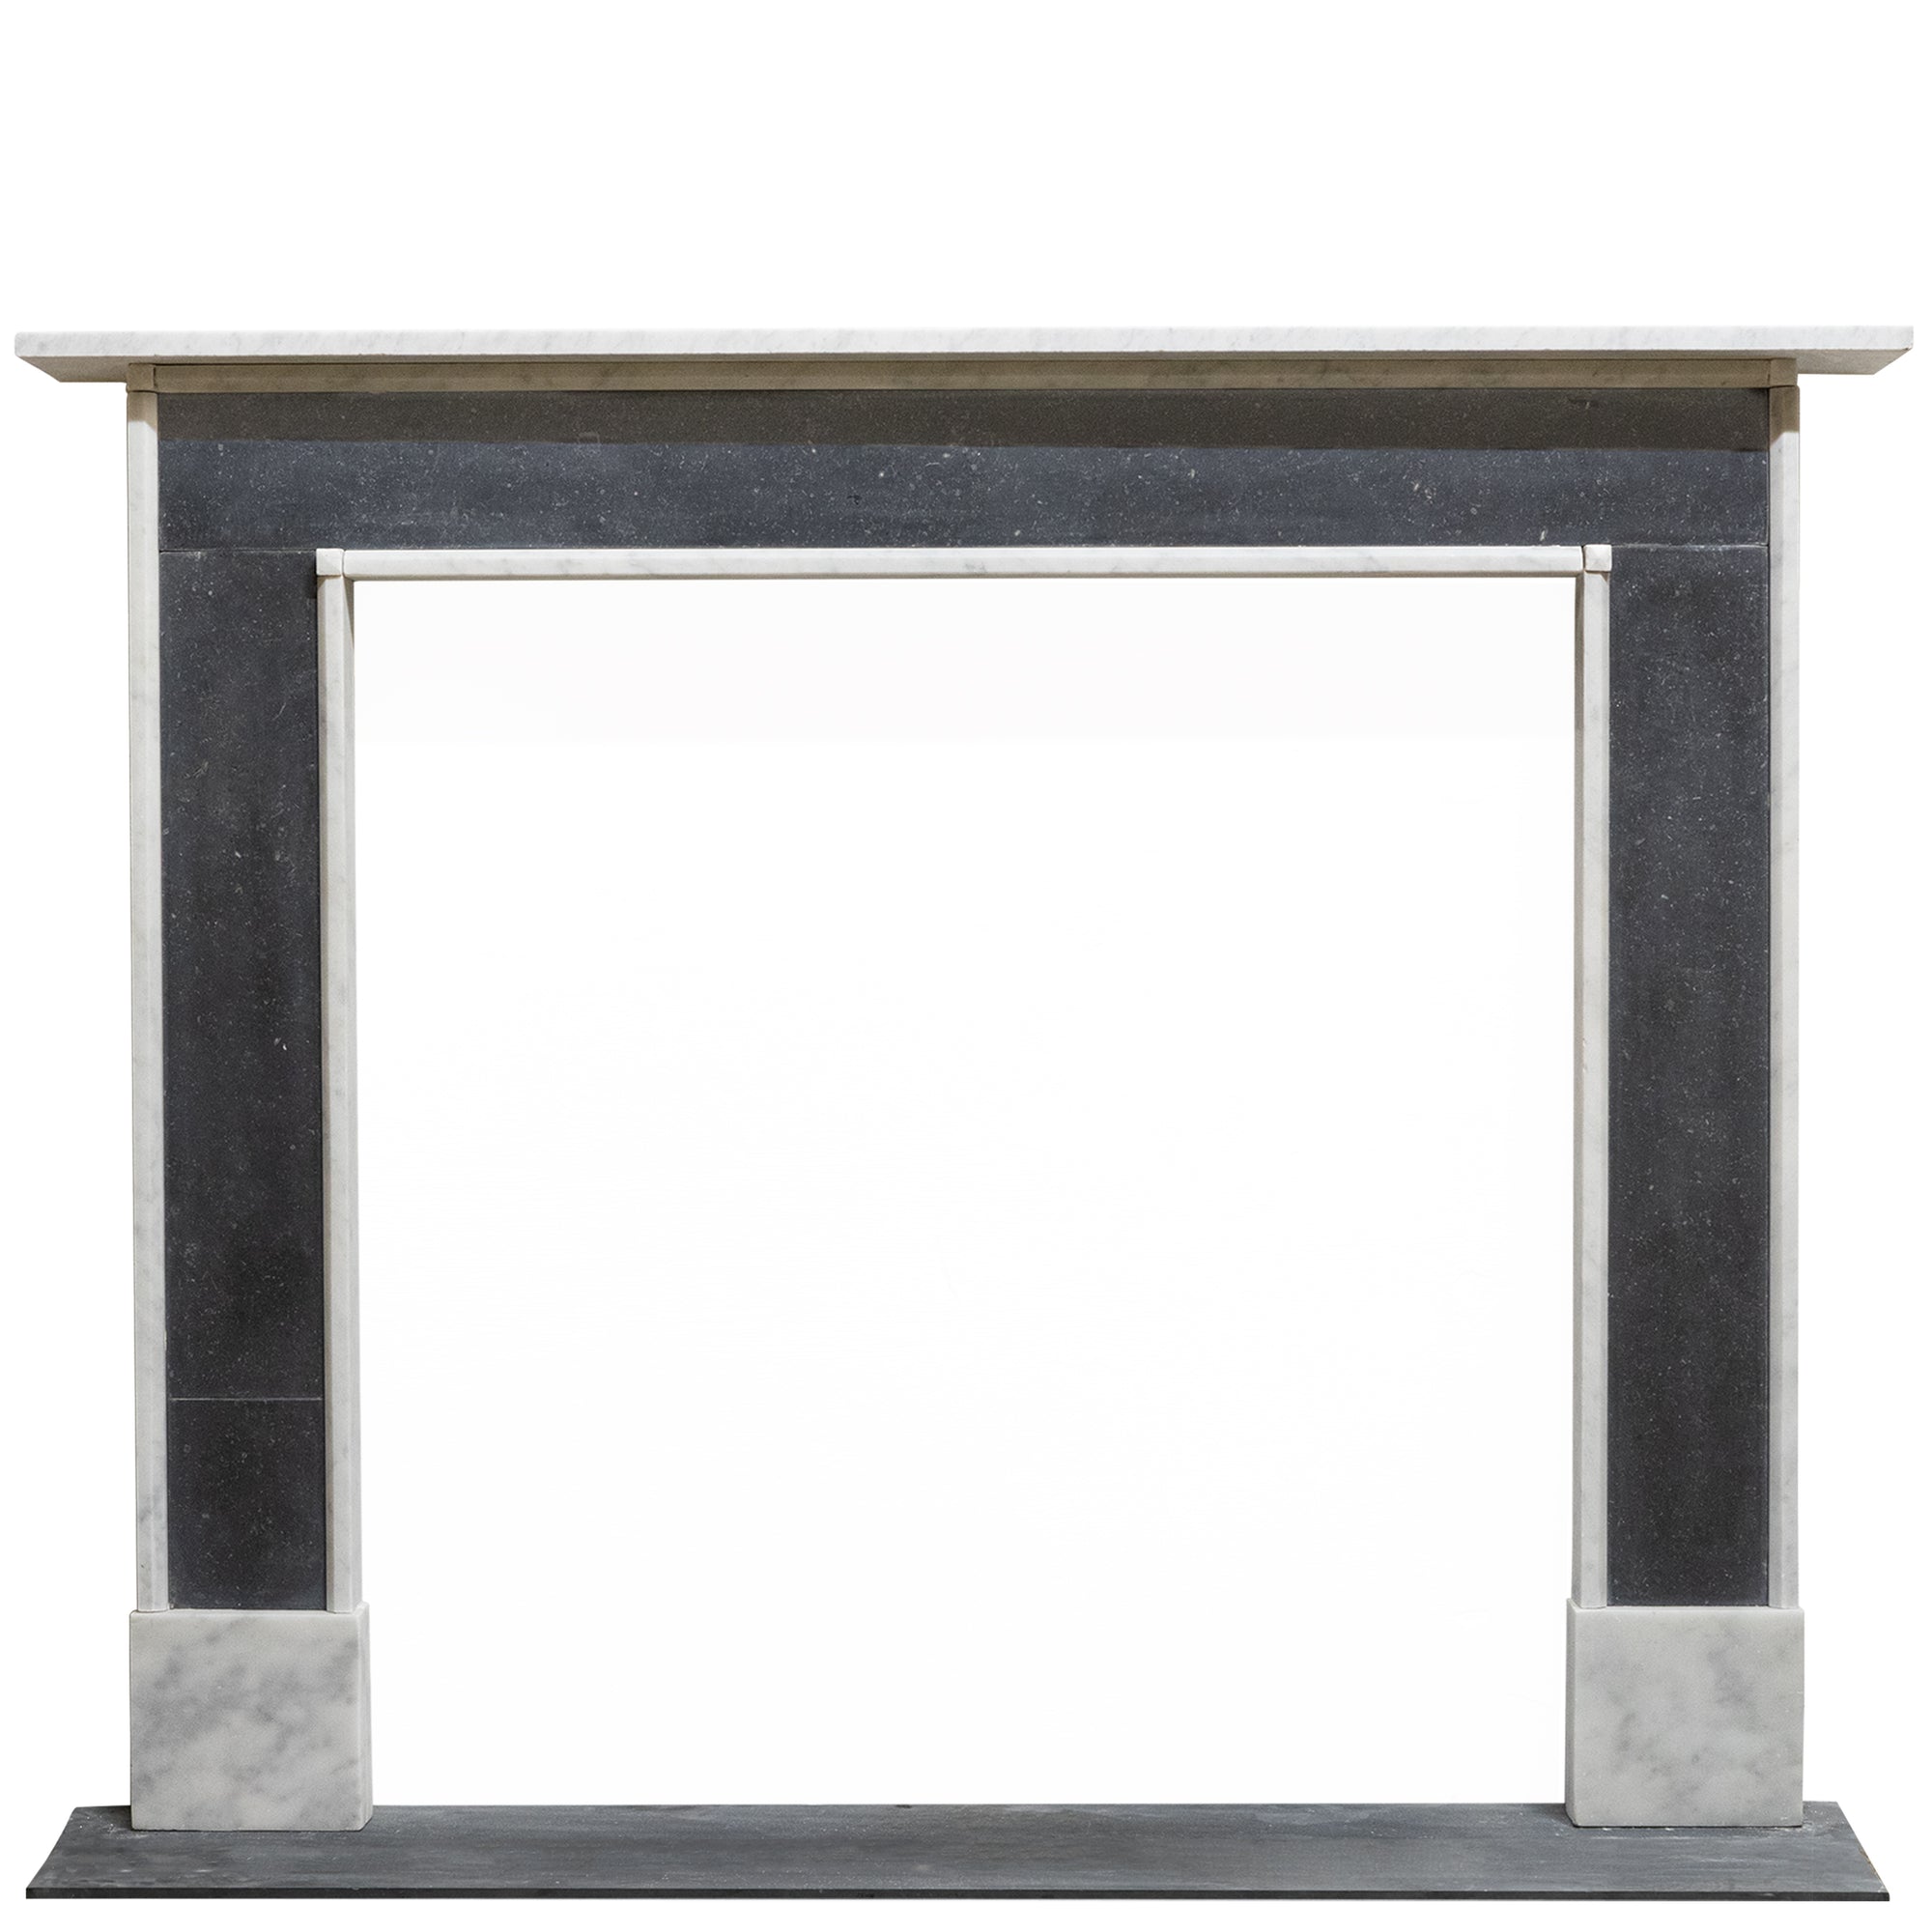 Regency Style Carrara & Black Marble Fireplace Surround | The Architectural Forum